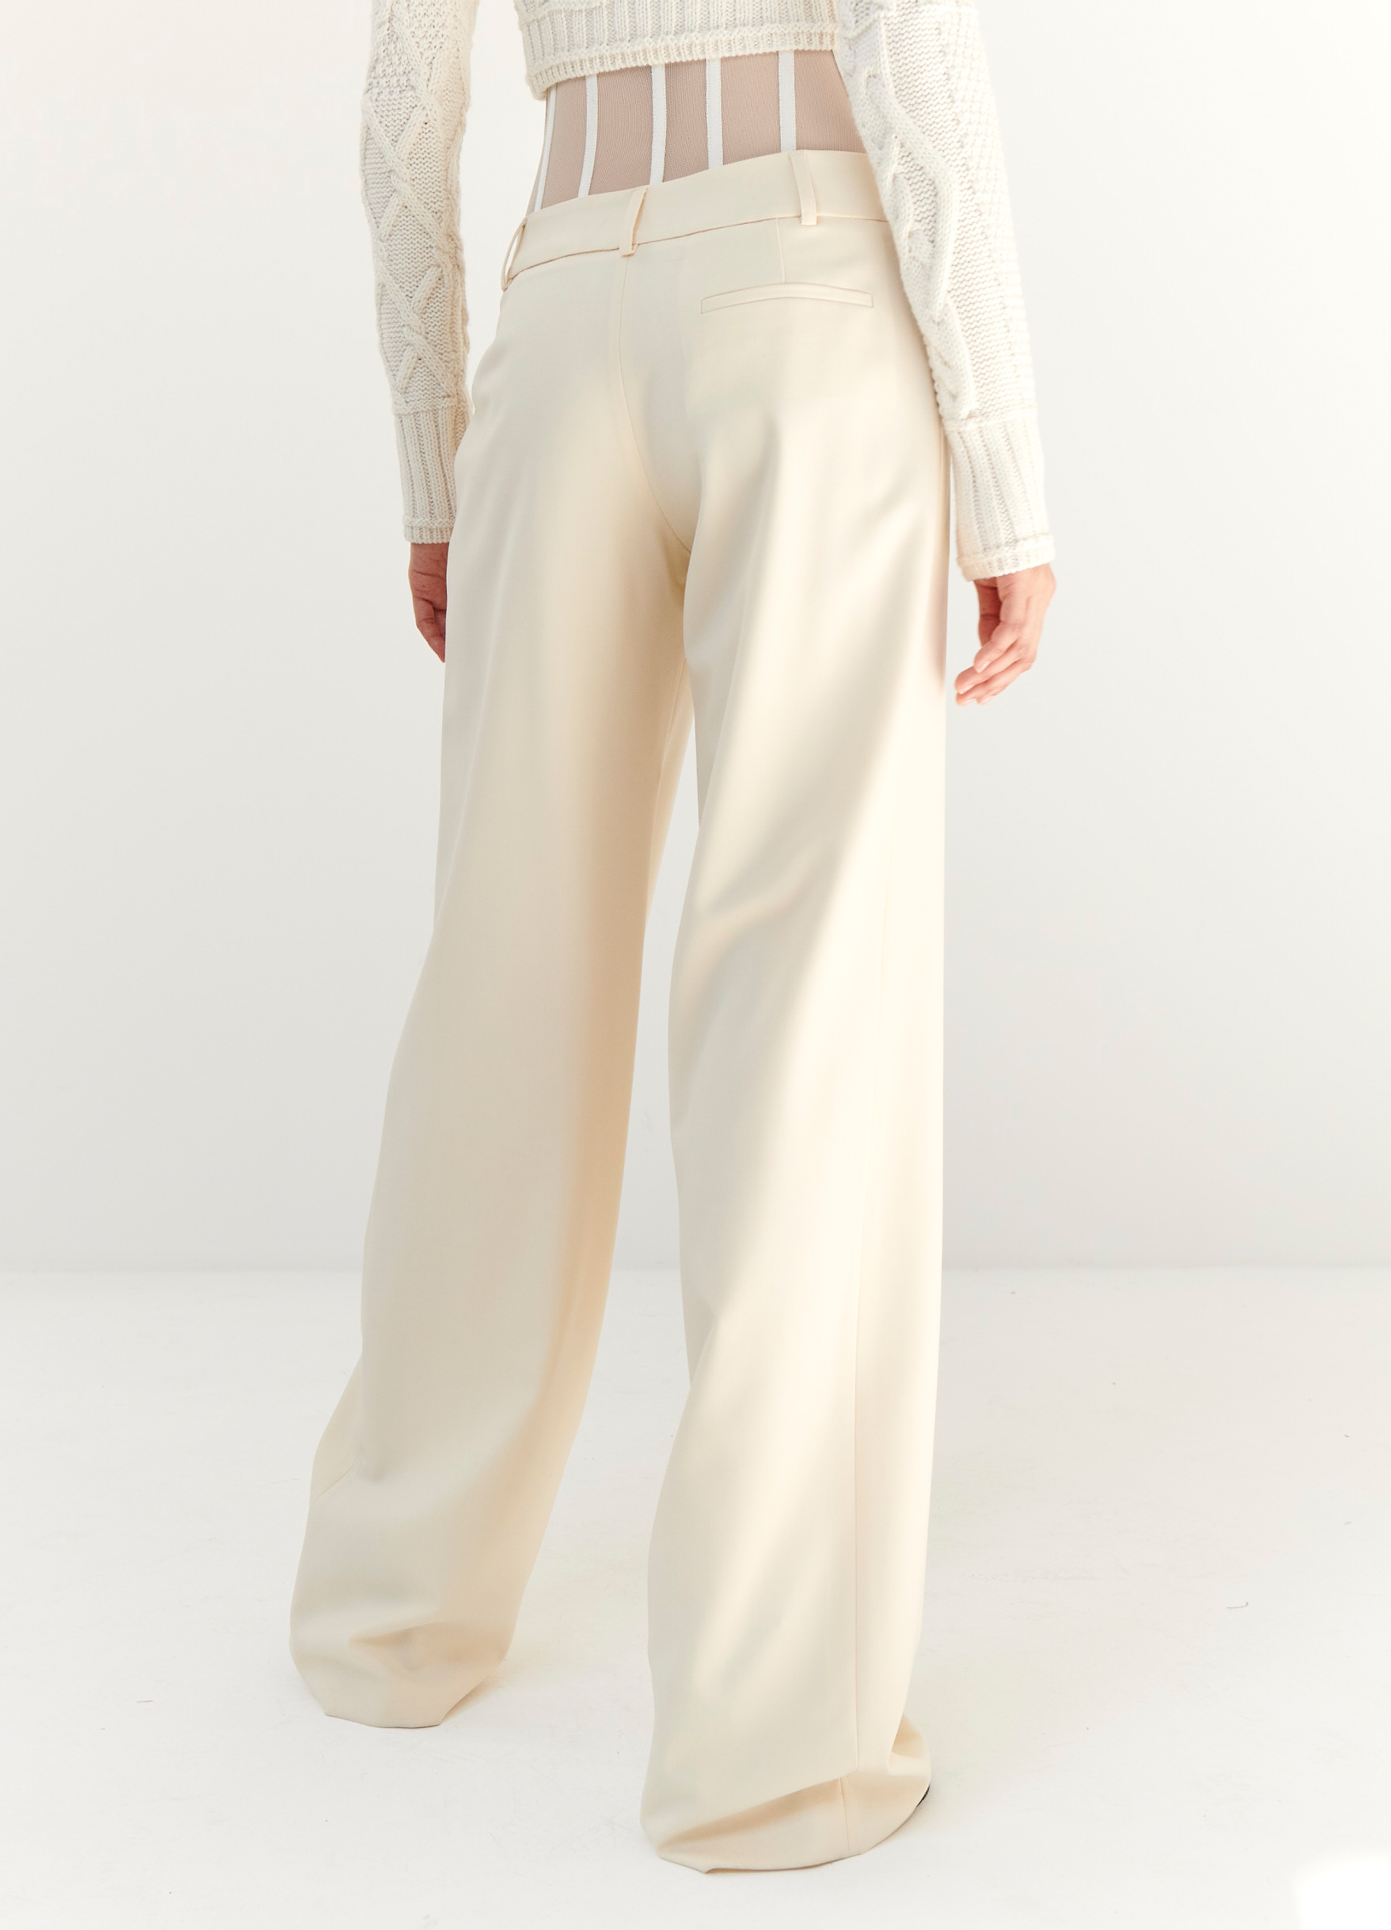 MONSE Mesh Bustier Trousers in Ivory on model back detail view